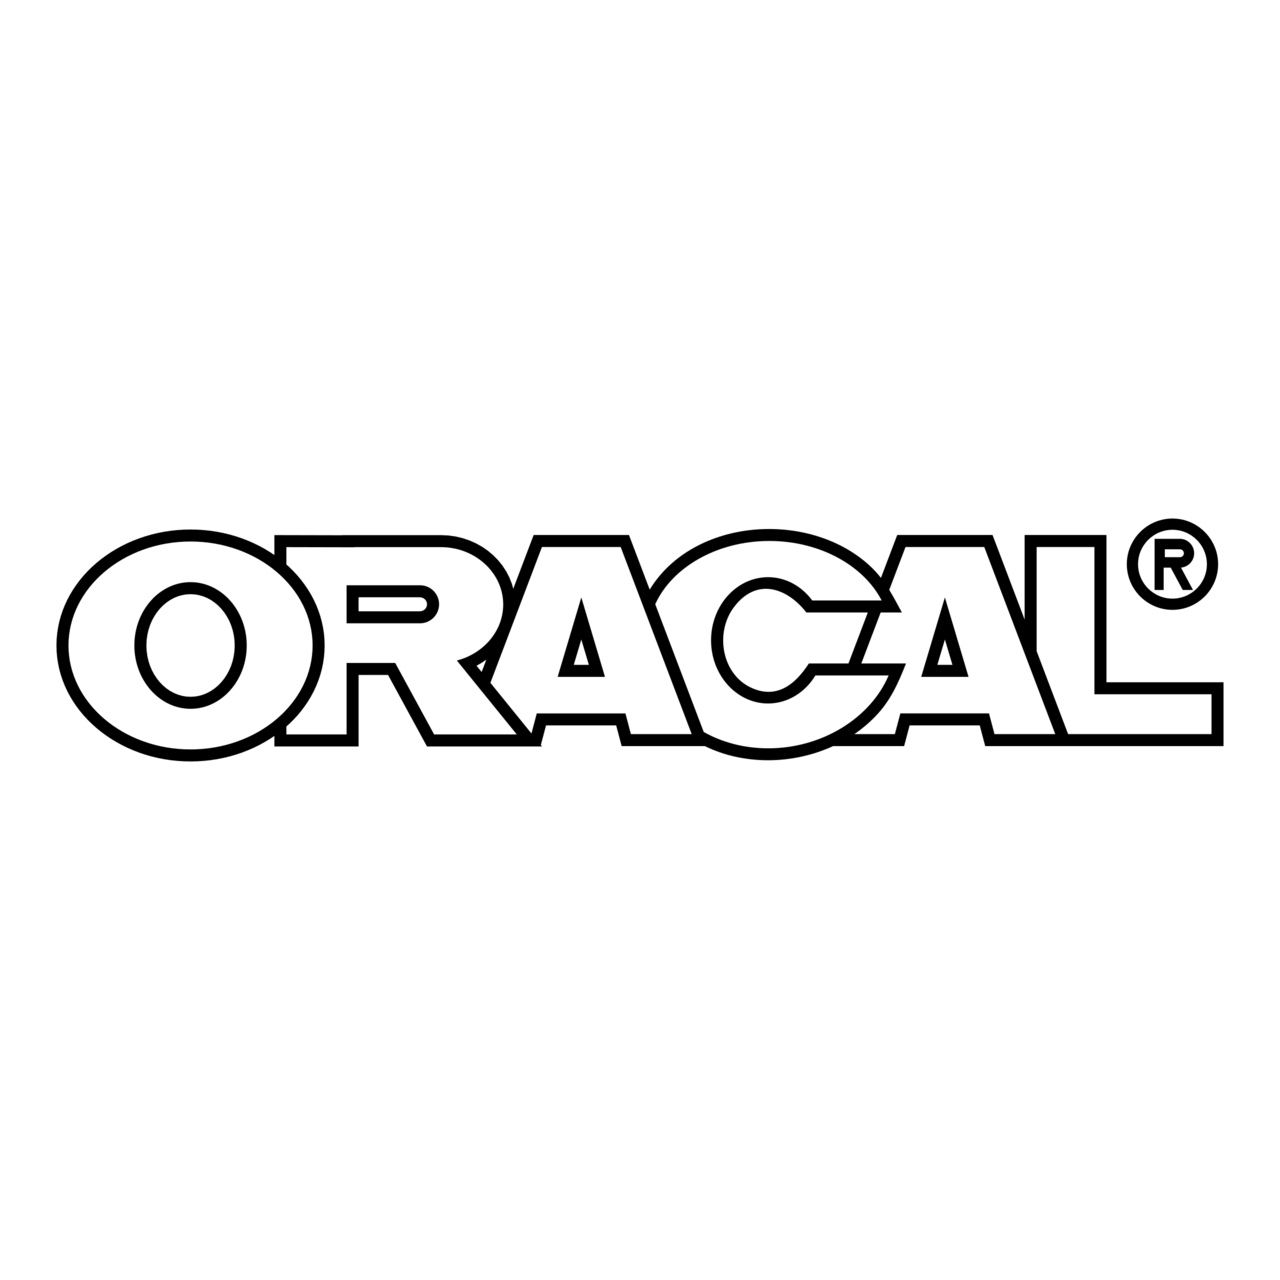 Download ORACAL Vinyl Logo PNG and Vector (PDF, SVG, Ai, EPS) Free